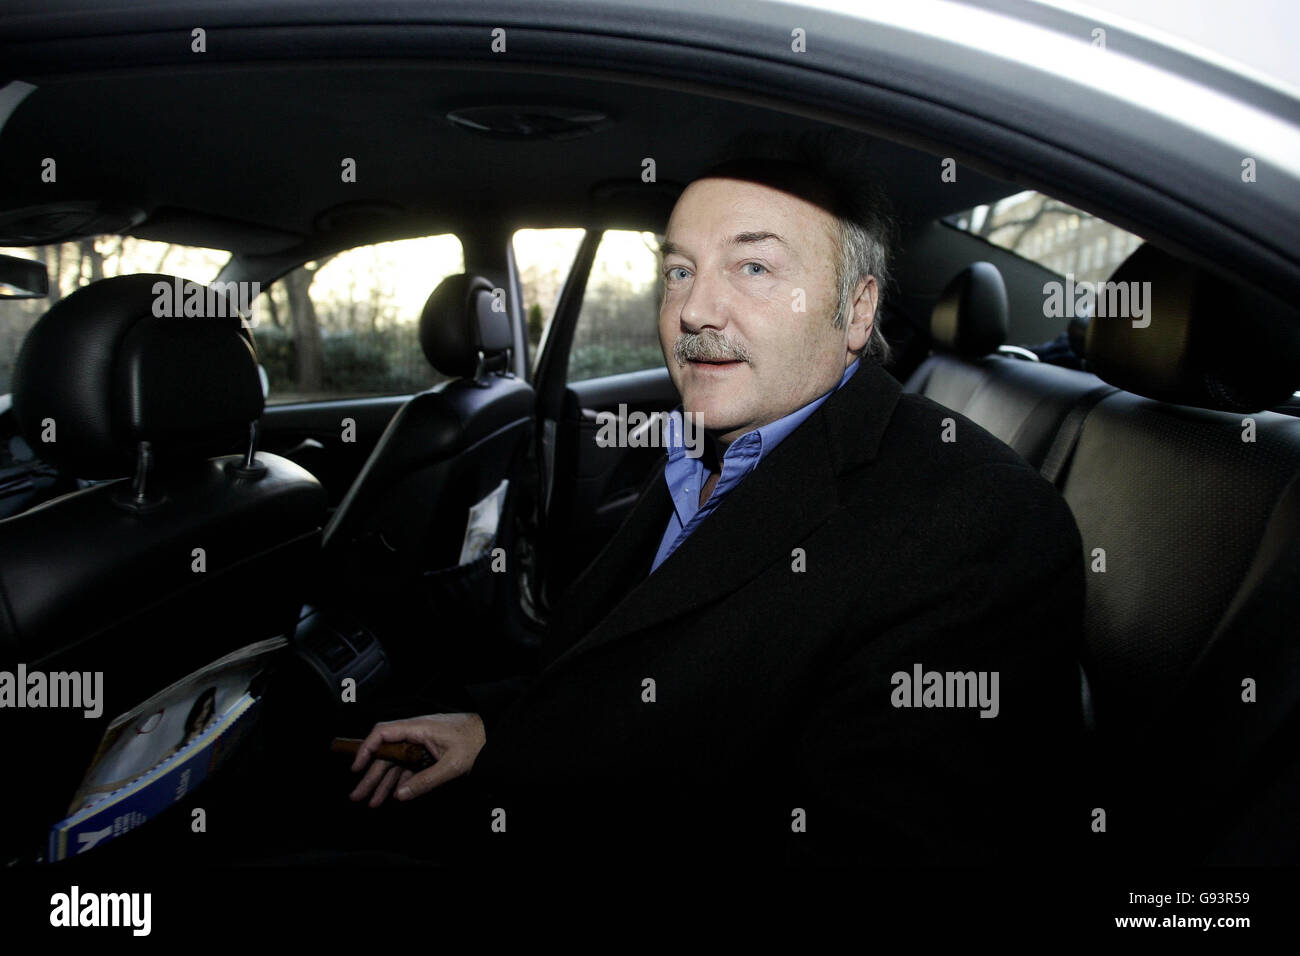 MP George Galloway leaves Durley Hotel in Sloane St, West London, Thursday 26 January 2006 after being evicted from Celebrity Big Brother. See PA story SHOWBIZ Bother Galloway. PRESS ASSOCIATION Photo. Photo credit should read: Andrew Parsons/PA Stock Photo